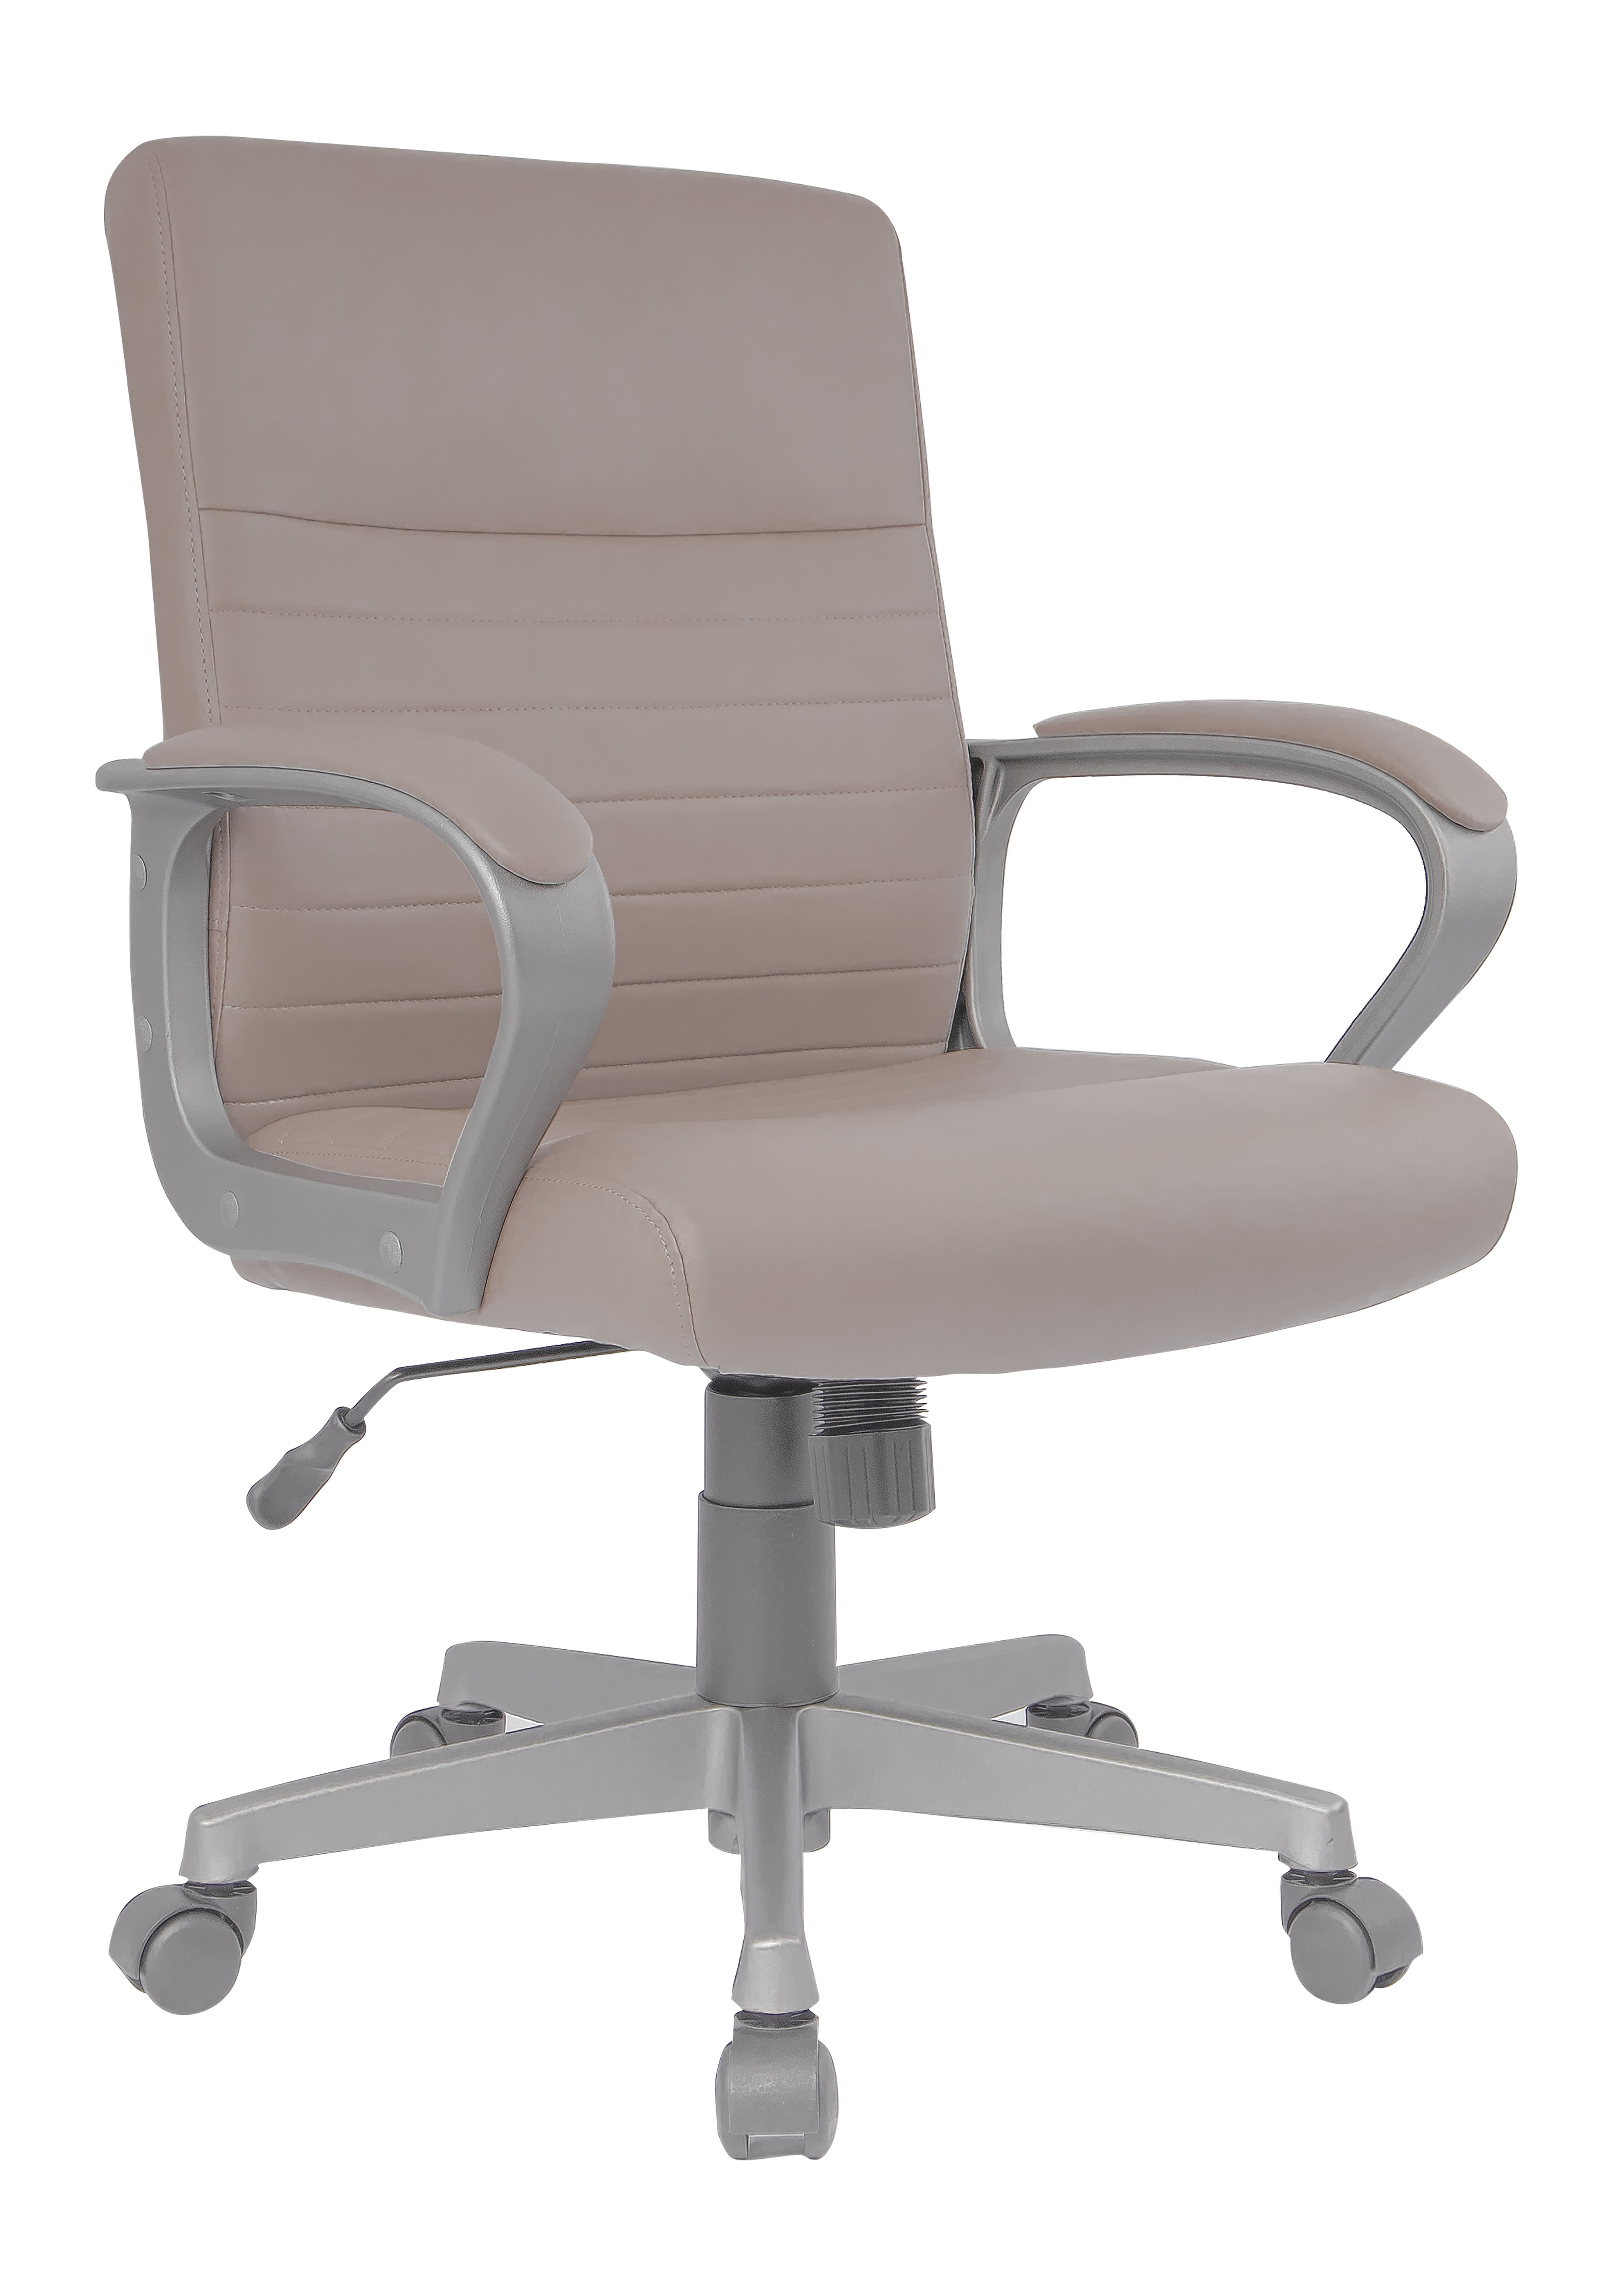 Staples Tervina Luxura Mid-Back Manager Chair 56905 - Walmart.com